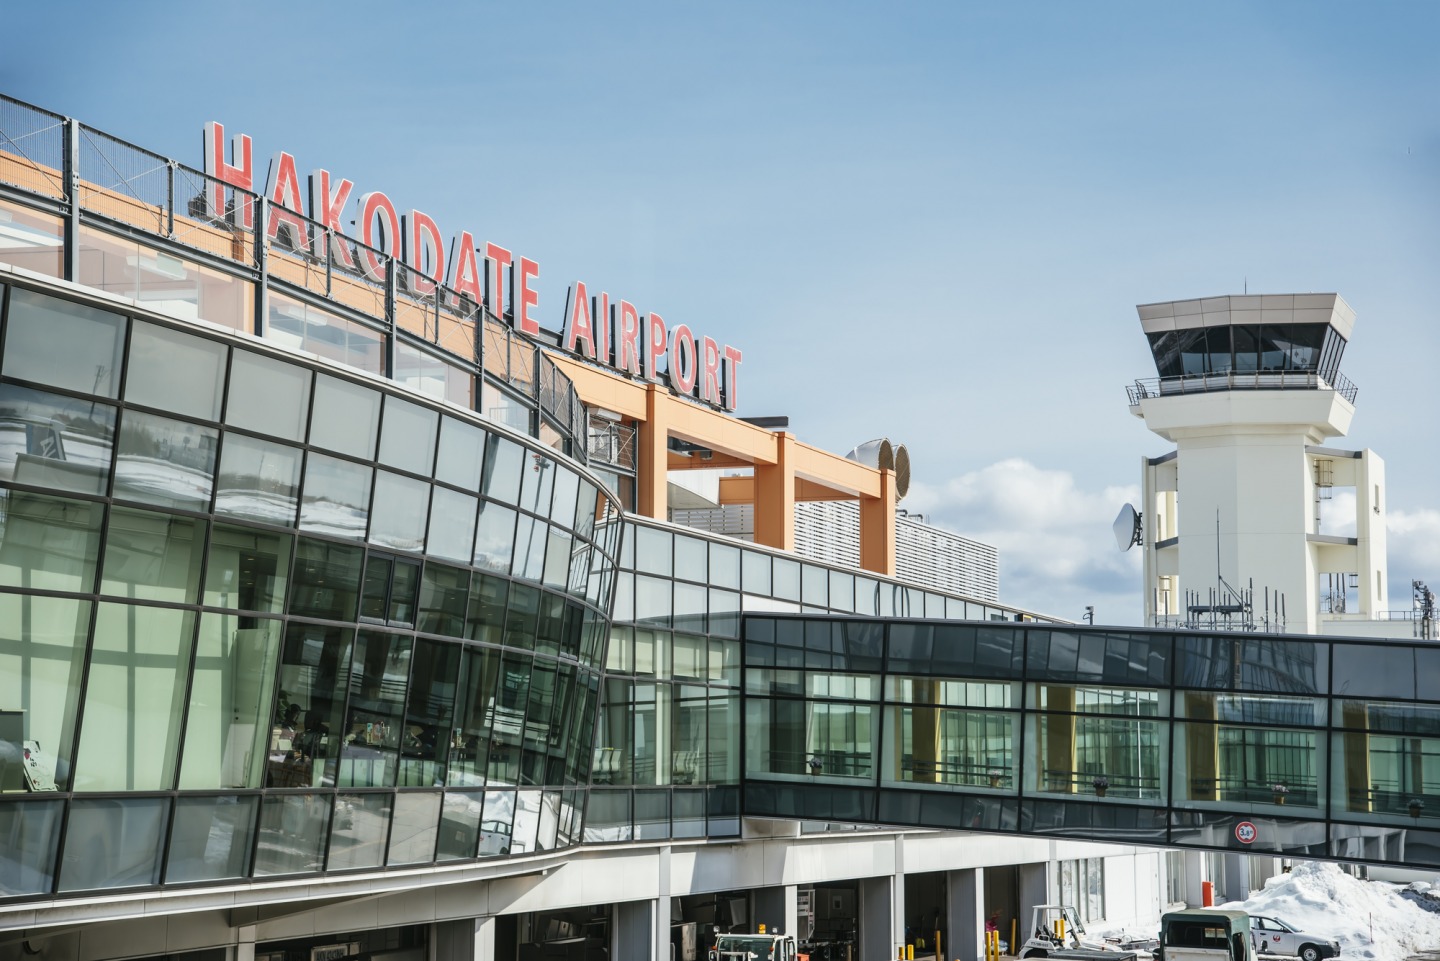 Hakodate Airport: Connecting the City of Night Views and History to Mainland Japan and the Rest of Hokkaido